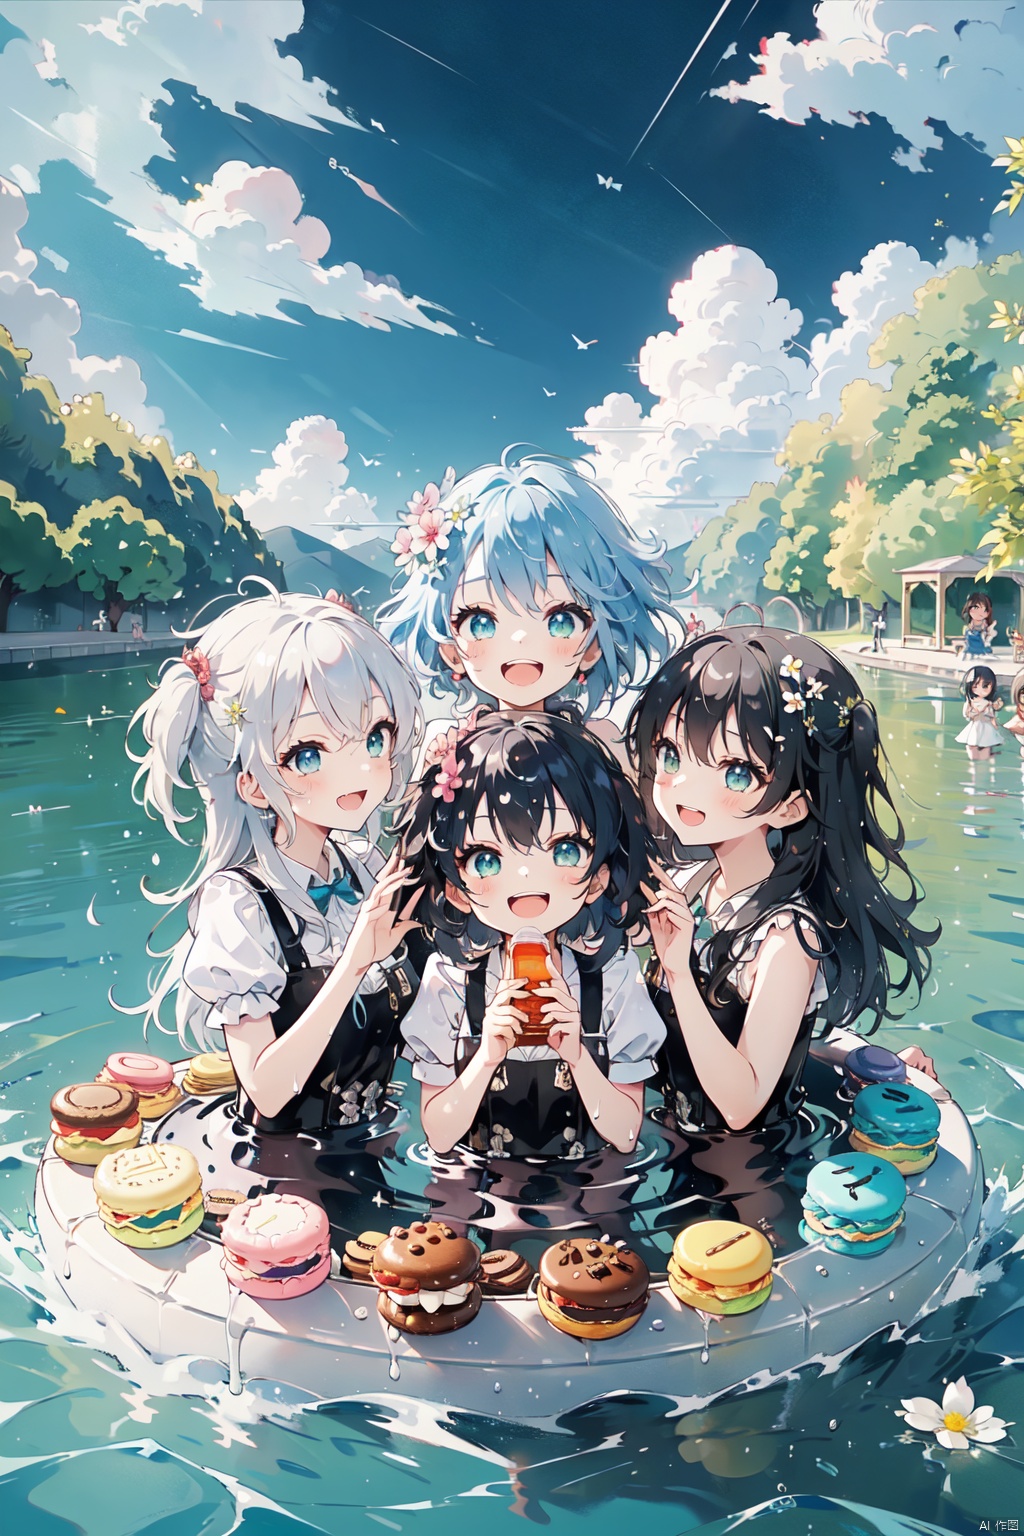  4+ girls, multiple colored hairs, sweet maids, random cute faces, super happy smiling, laughing,group shot, zoom camera, sweet tea party,lots of cakes, macarons, chocolates, parfaits, cookies, land of sweets，(masterpiece, best quality), 3boys, playing in water, lake full of flowers, clouds, sun, blue sky, good face, laughing, splashing, having fun, enjoying, water gun